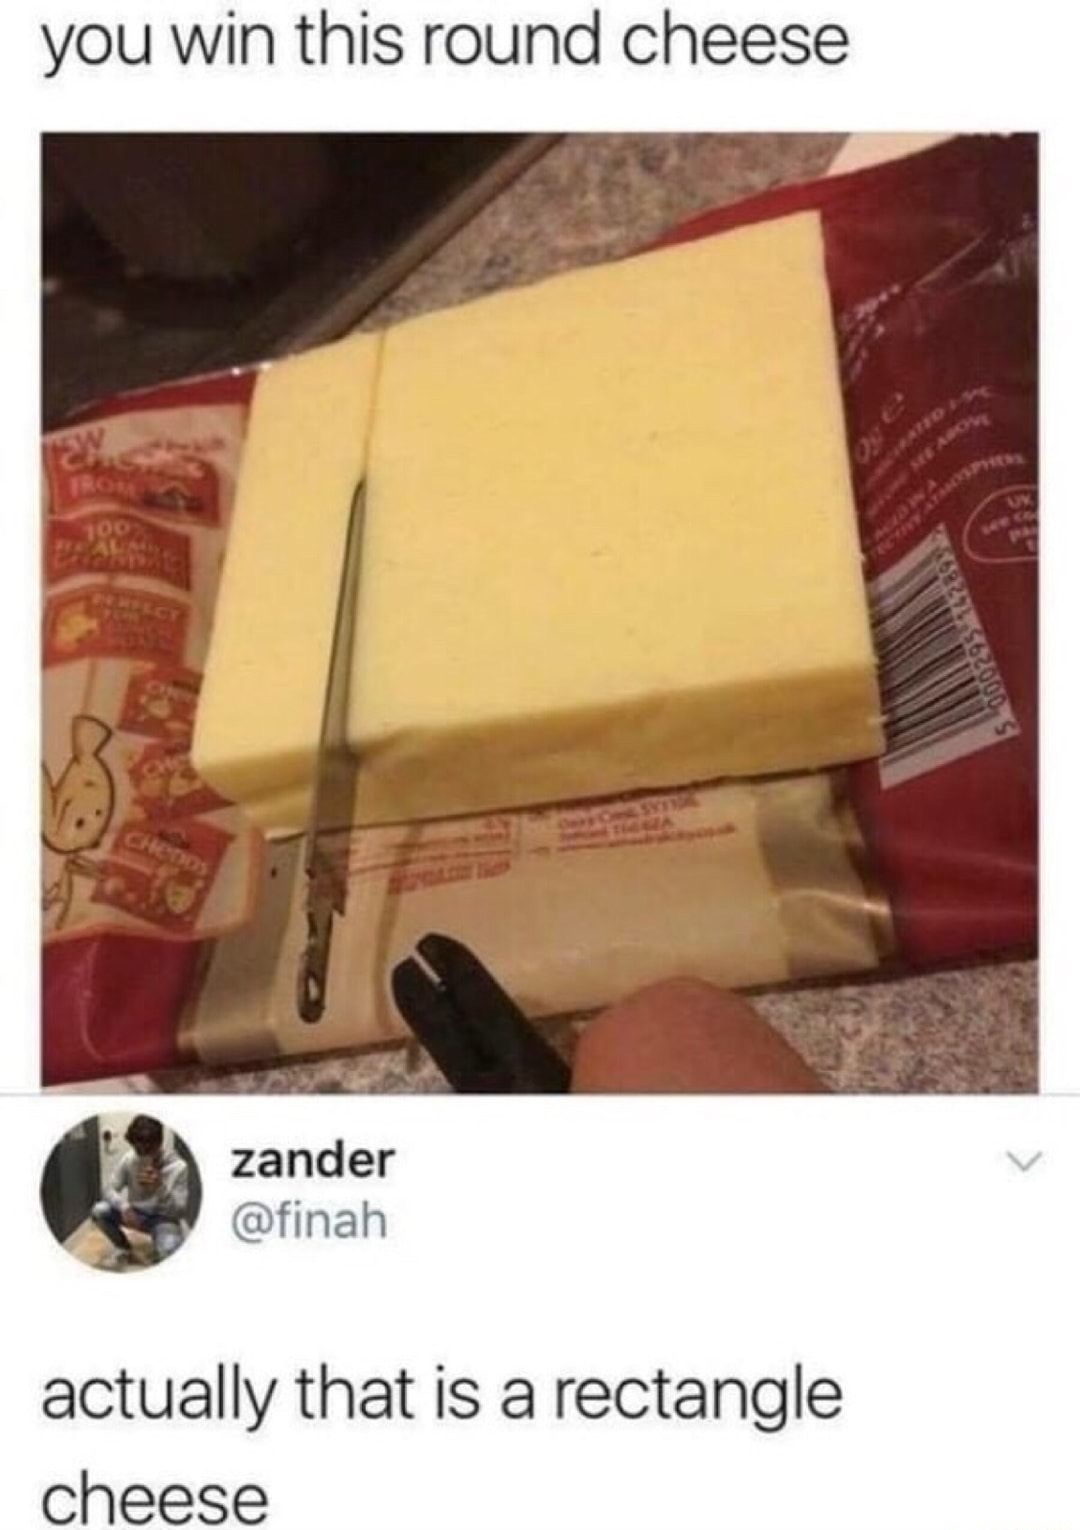 Thursday meme about you win this round cheese - you win this round cheese 09 zander actually that is a rectangle cheese